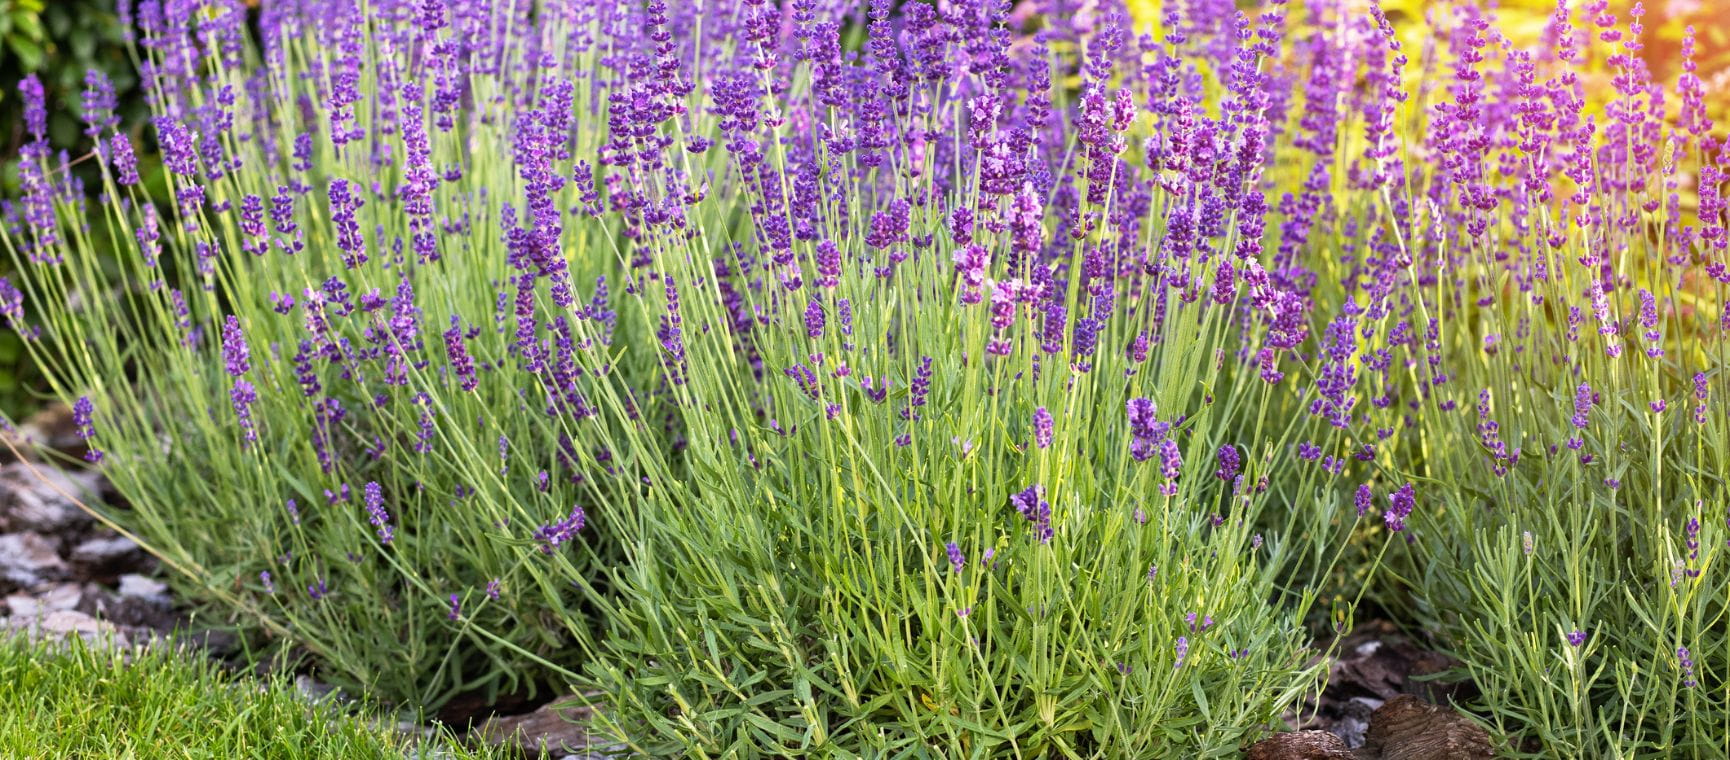 A grouping of lavender plants in full bloom